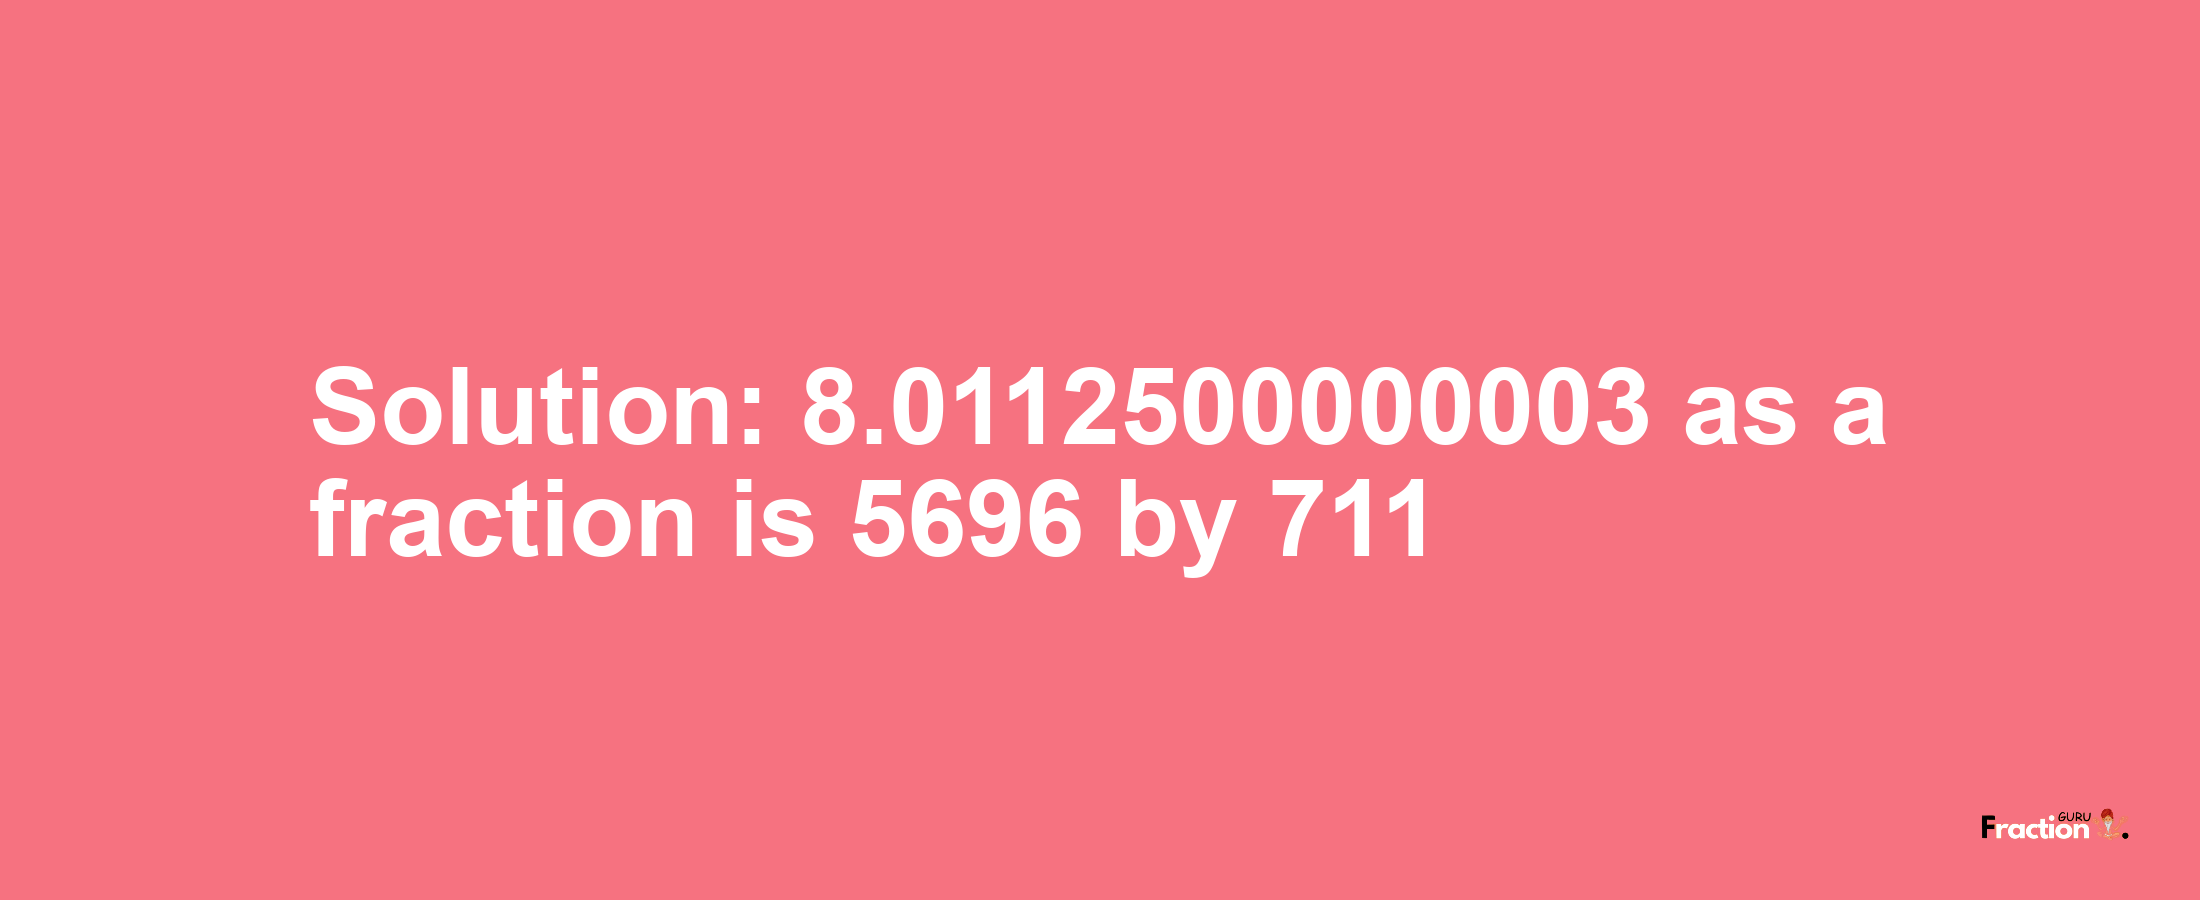 Solution:8.0112500000003 as a fraction is 5696/711